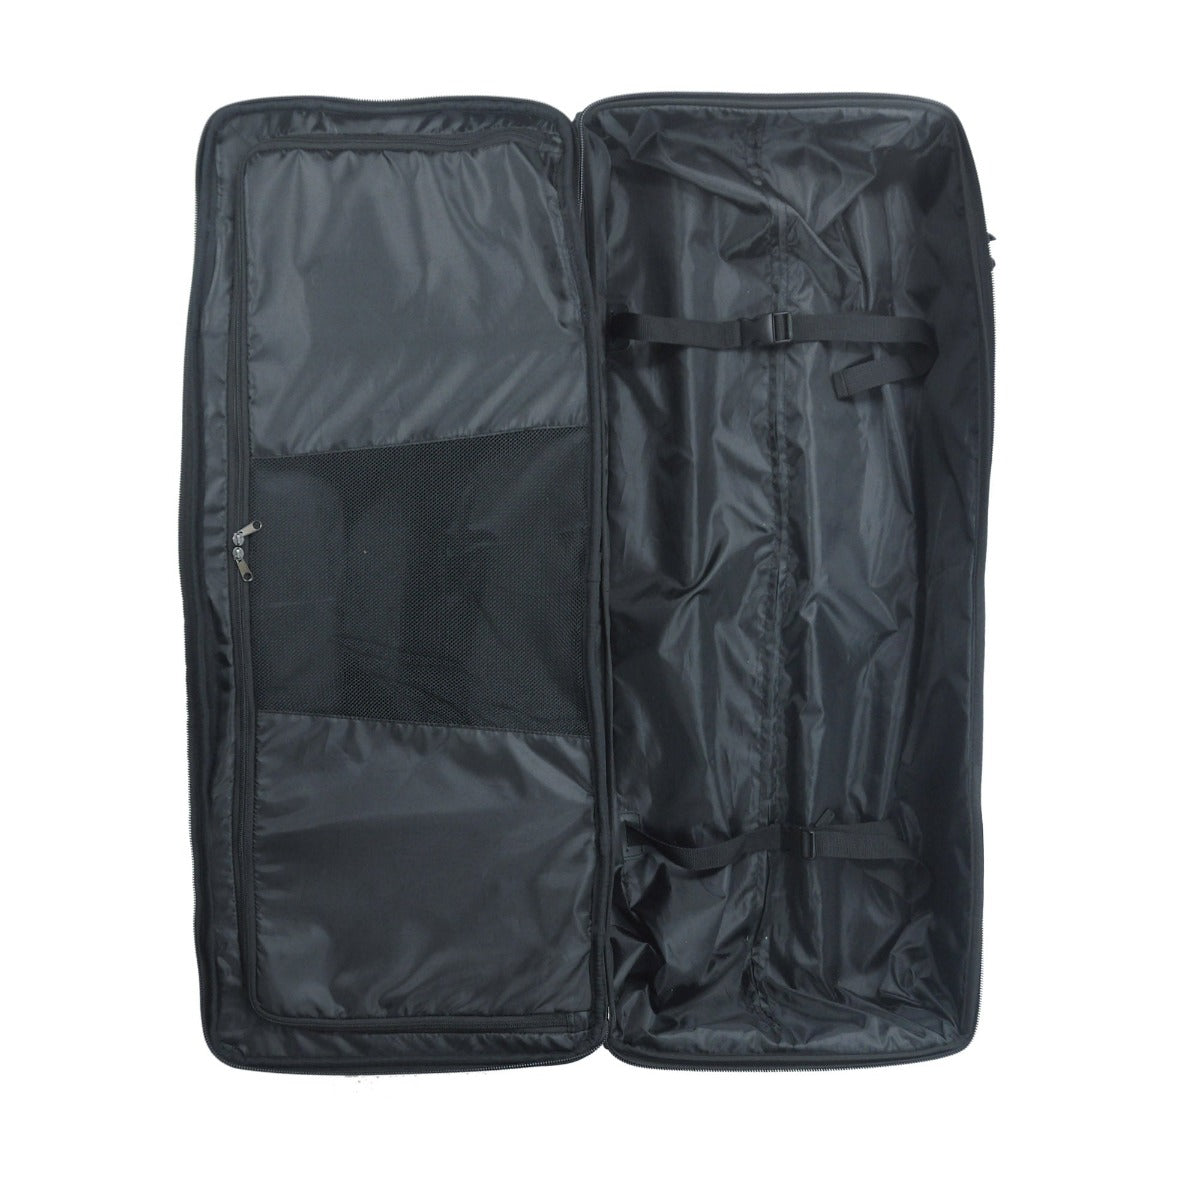 Ful Tour Manager 36" oversized travel rolling duffle bag